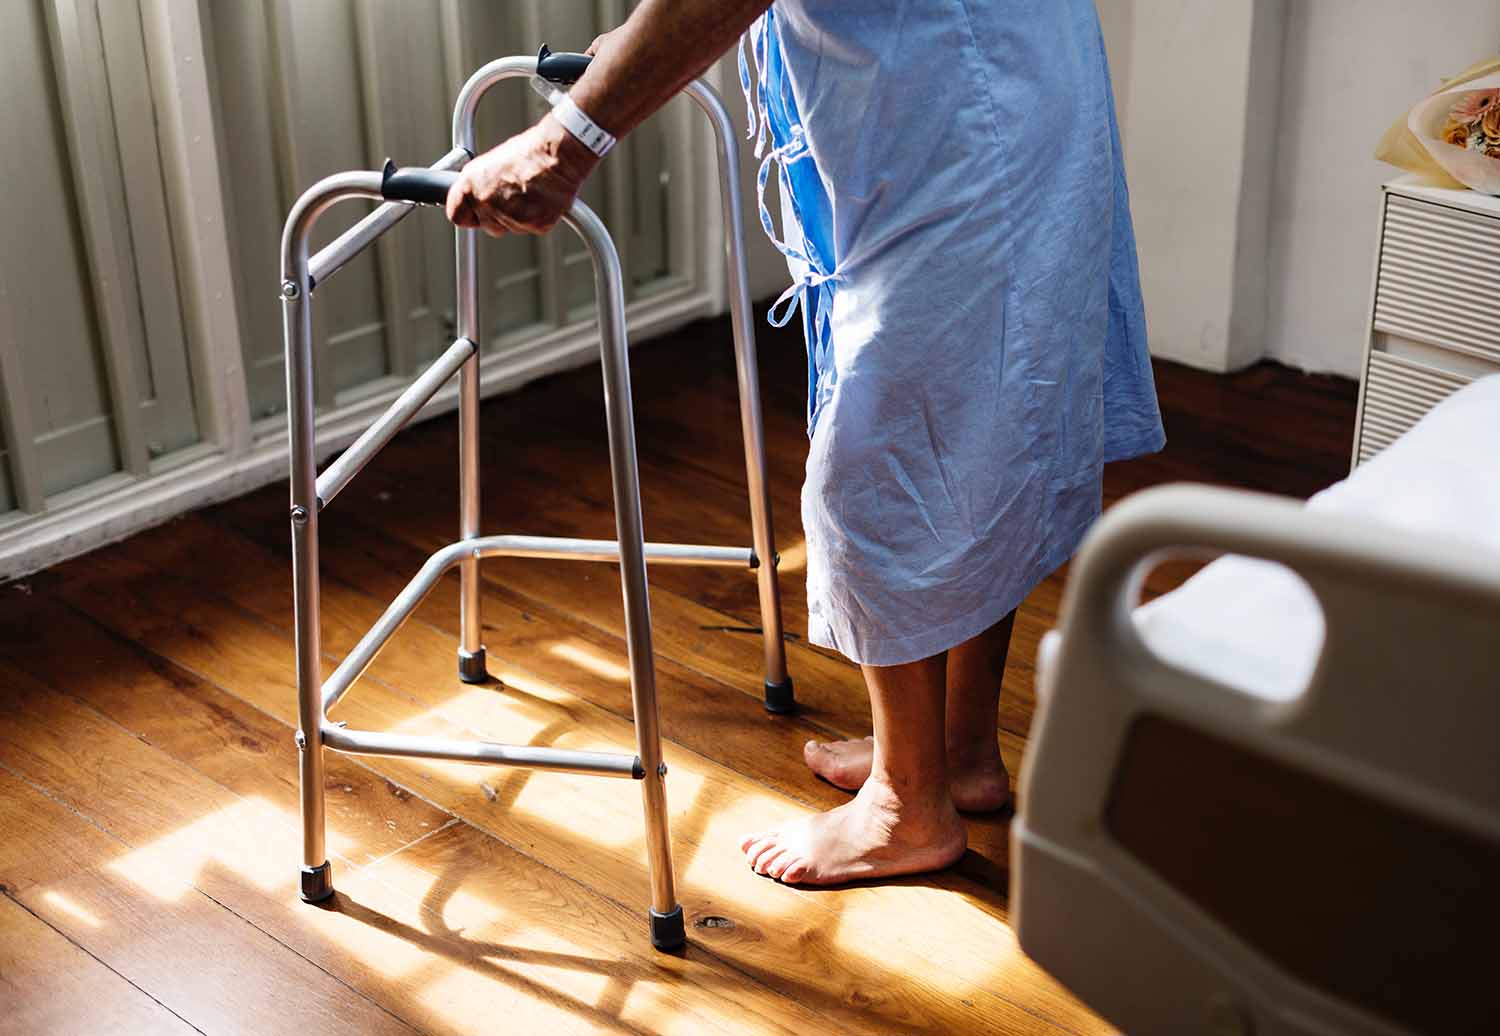 Elder person in hospital gown with walker 1500 x 1033